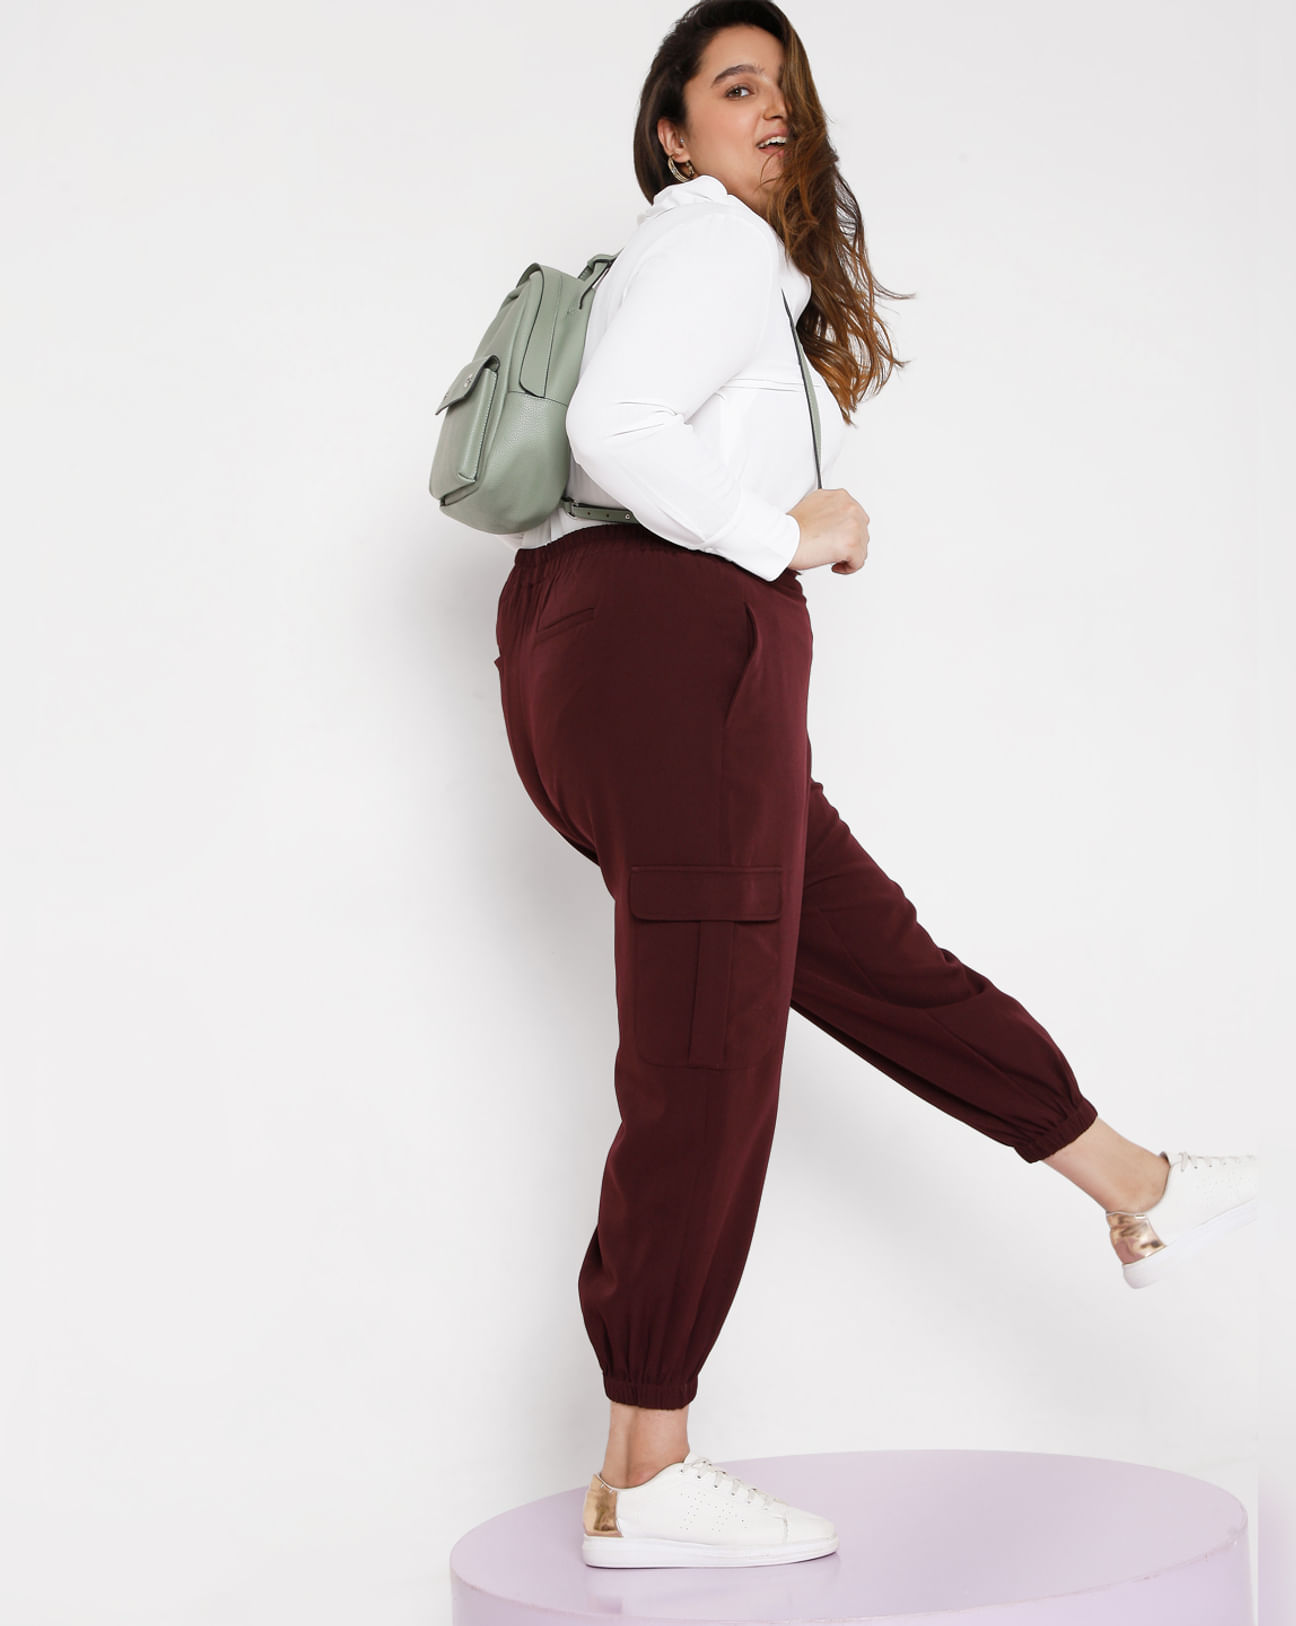 SUBH Women's Cargo Trouser. A Perfect Style for Indoor and Outdoor.